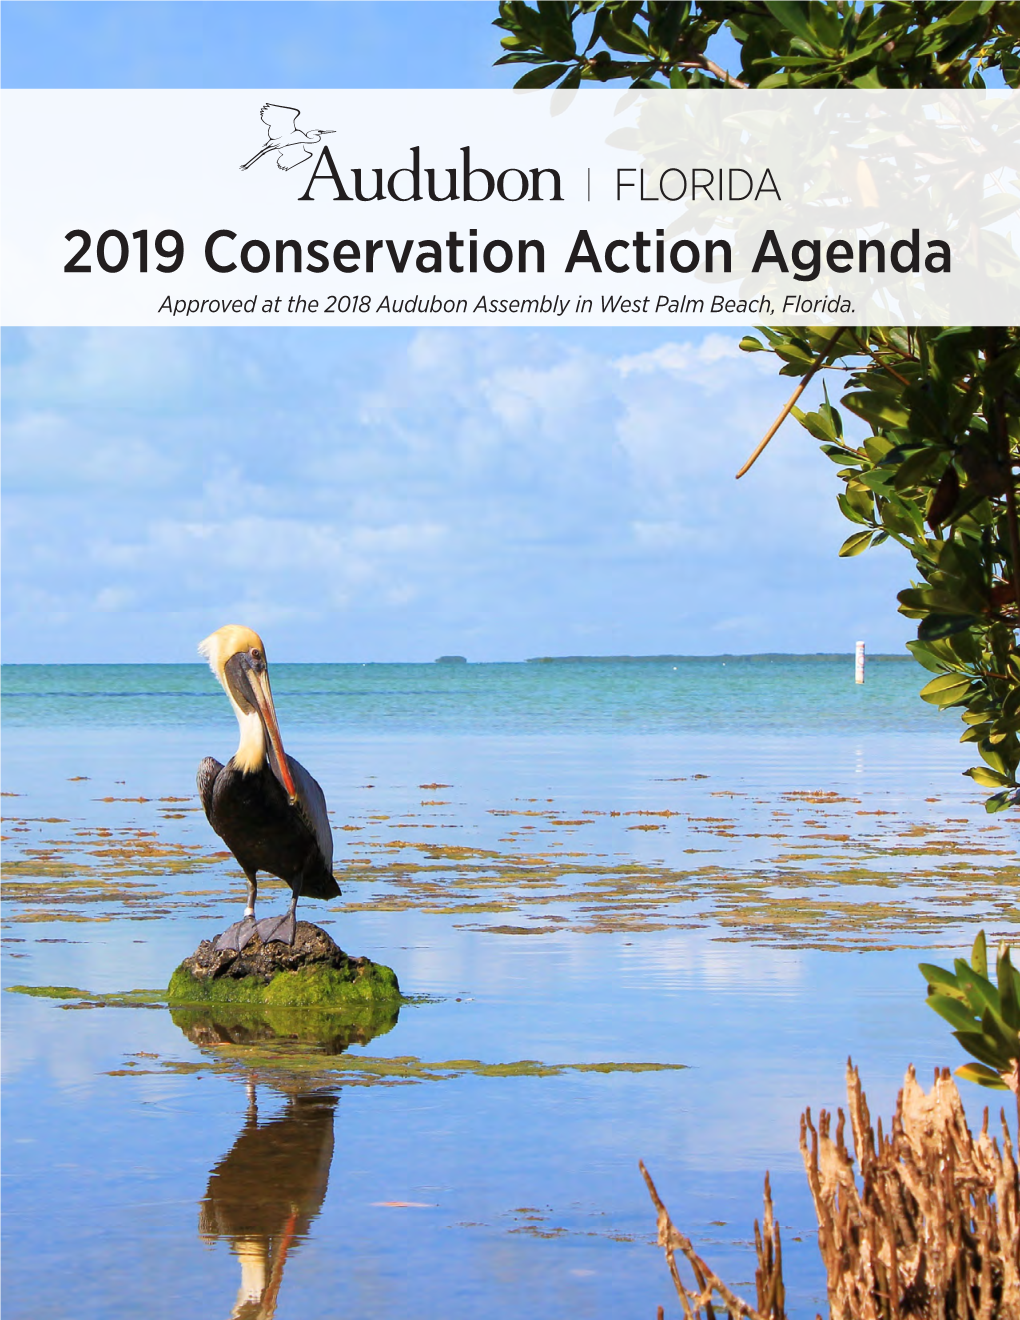 2019 Conservation Action Agenda Approved at the 2018 Audubon Assembly in West Palm Beach, Florida